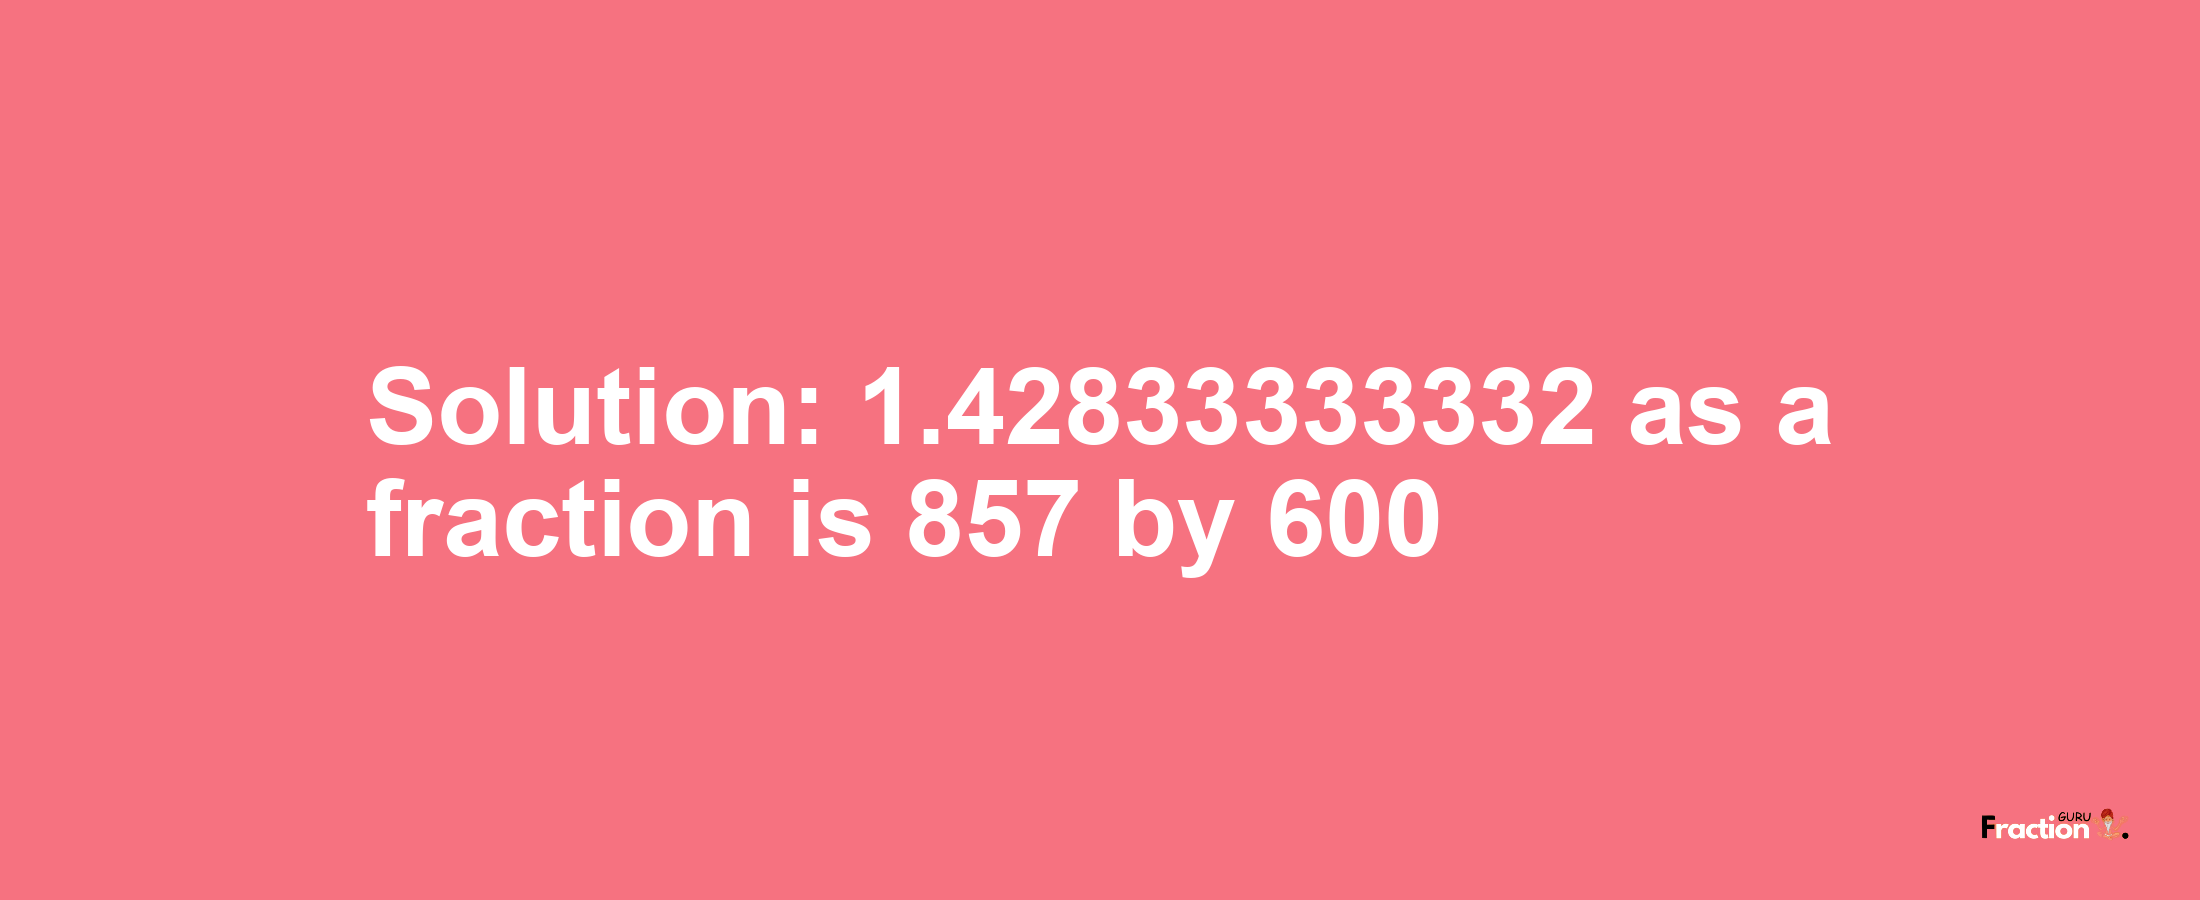 Solution:1.42833333332 as a fraction is 857/600